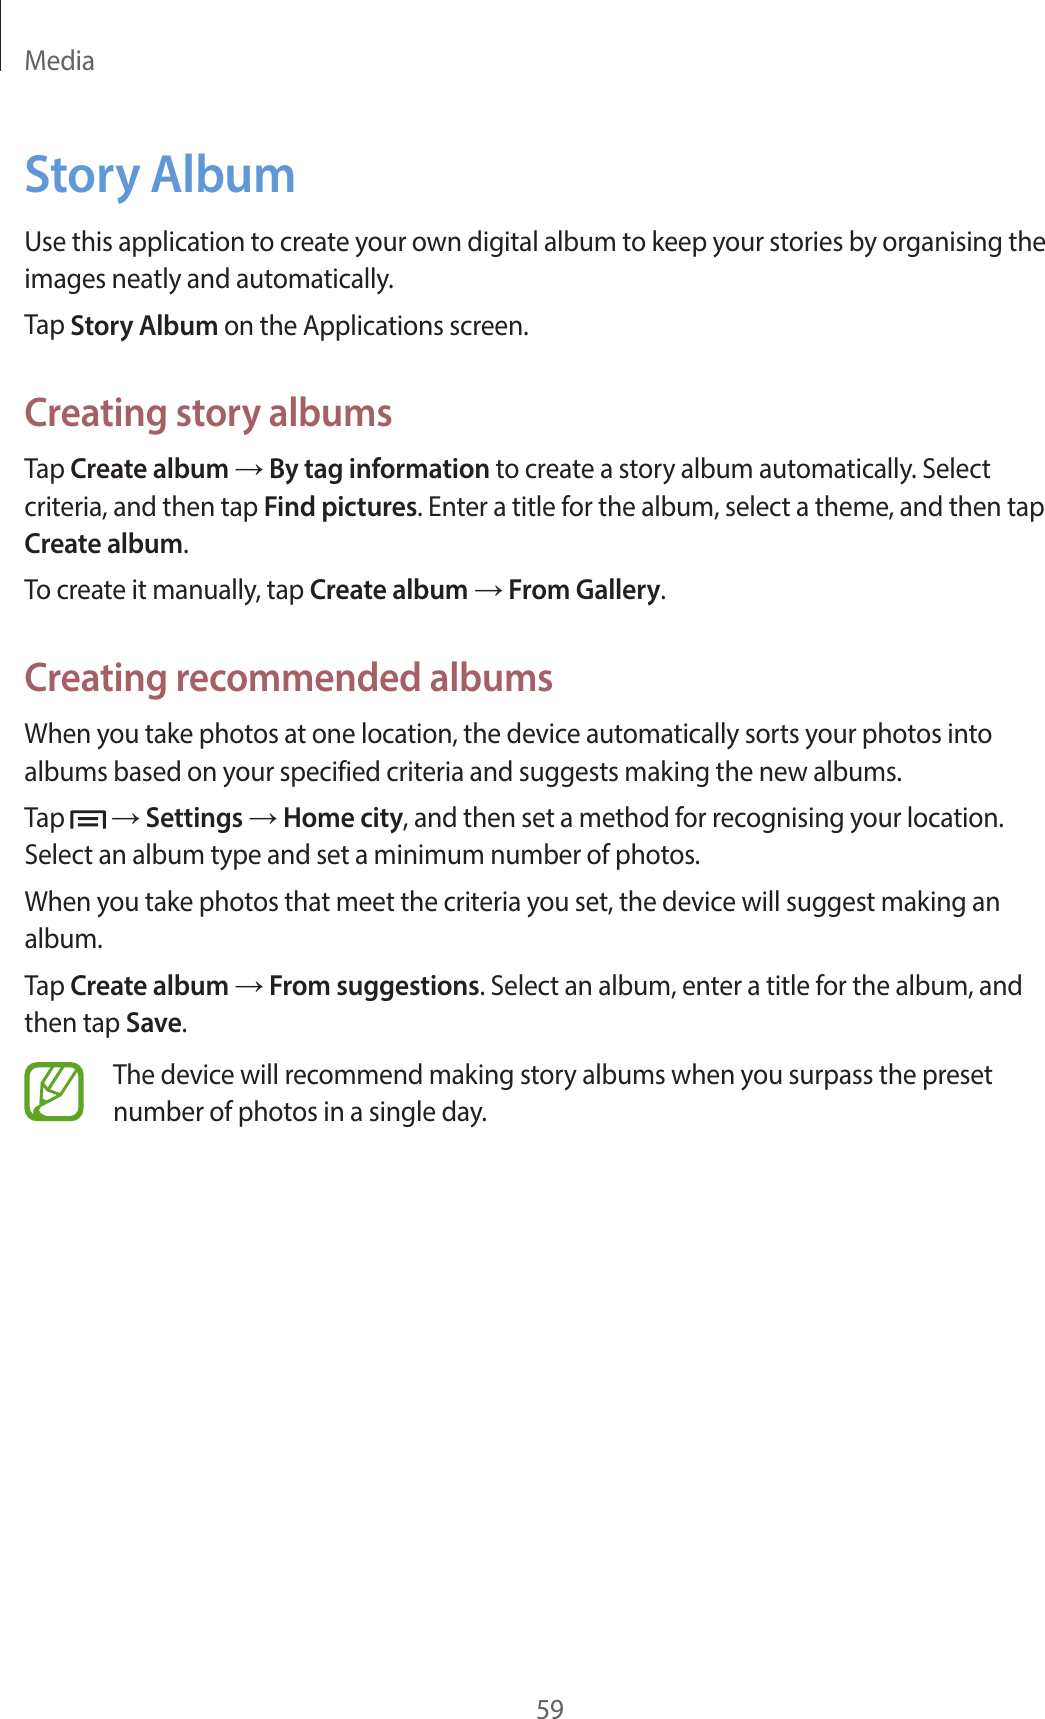 Media59Story AlbumUse this application to create your own digital album to keep your stories by organising the images neatly and automatically.Tap Story Album on the Applications screen.Creating story albumsTap Create album → By tag information to create a story album automatically. Select criteria, and then tap Find pictures. Enter a title for the album, select a theme, and then tap Create album.To create it manually, tap Create album → From Gallery.Creating recommended albumsWhen you take photos at one location, the device automatically sorts your photos into albums based on your specified criteria and suggests making the new albums.Tap   → Settings → Home city, and then set a method for recognising your location. Select an album type and set a minimum number of photos.When you take photos that meet the criteria you set, the device will suggest making an album.Tap Create album → From suggestions. Select an album, enter a title for the album, and then tap Save.The device will recommend making story albums when you surpass the preset number of photos in a single day.